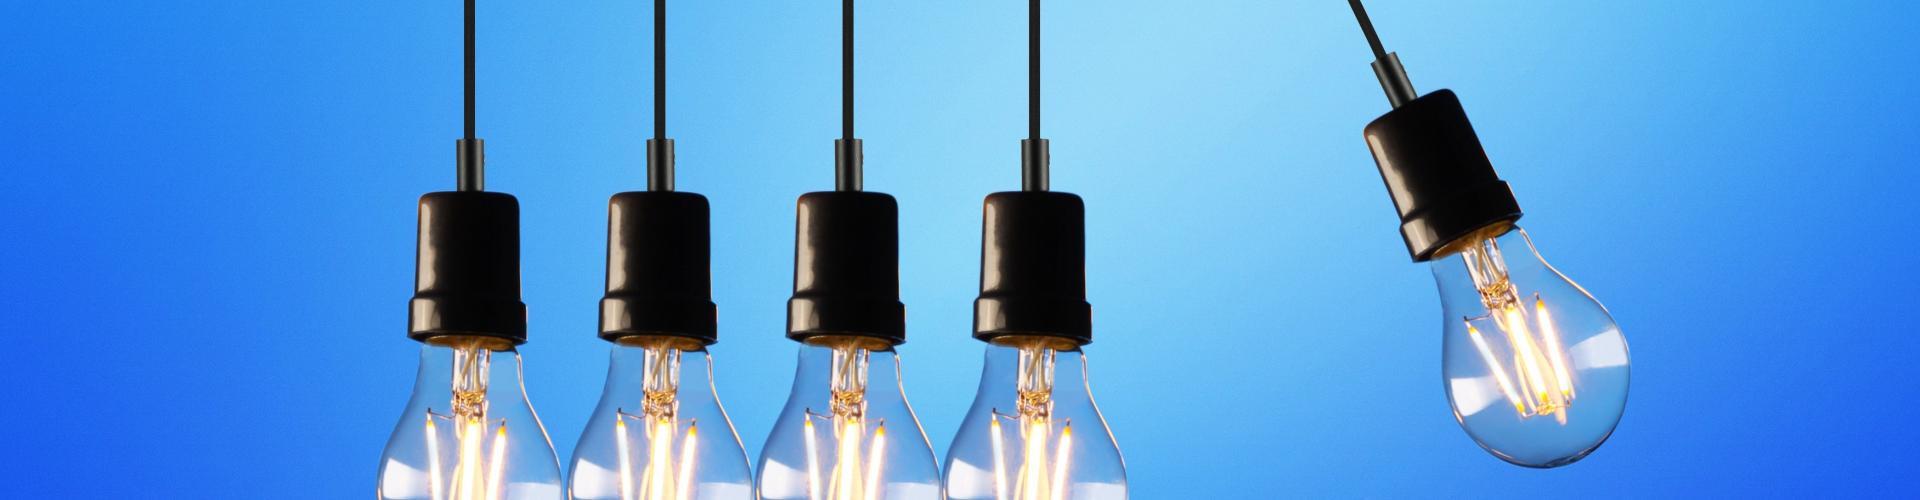 Five light bulbs hanging with one moving